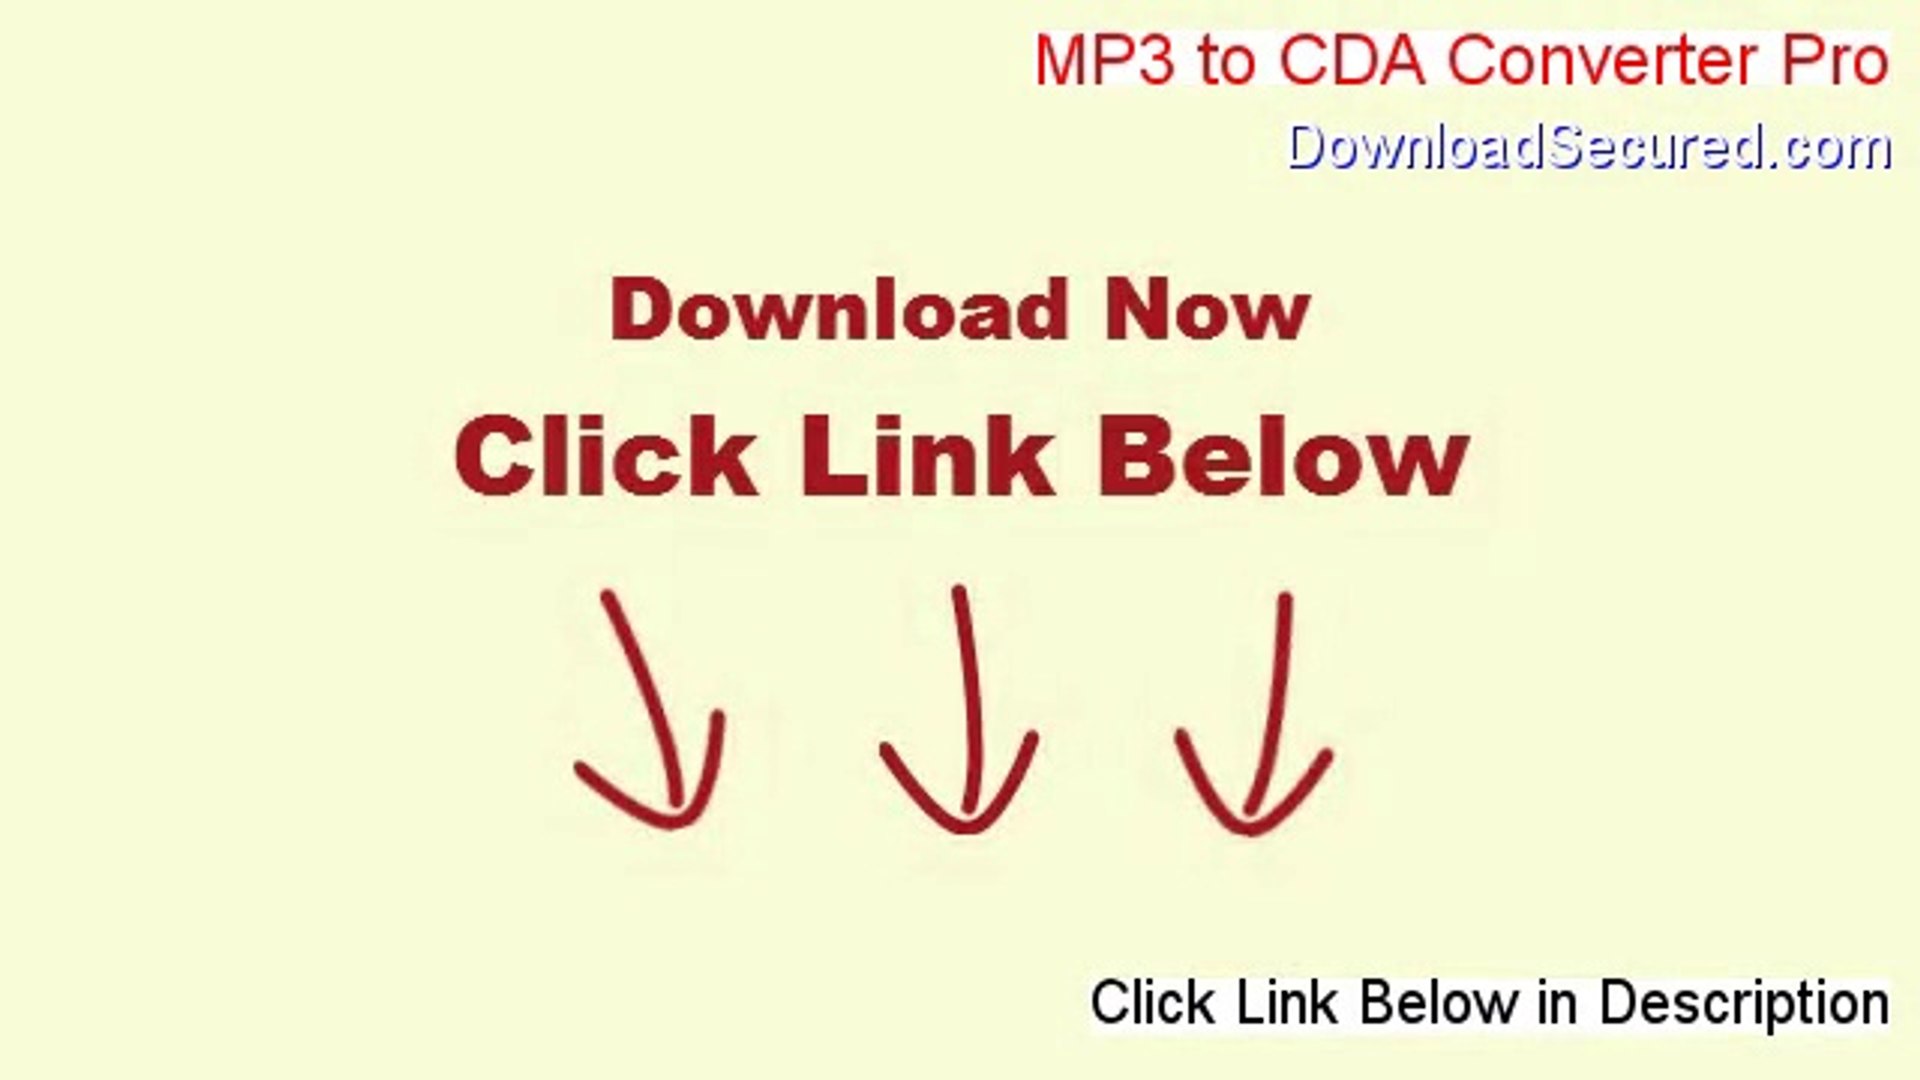 MP3 to CDA Converter Pro Full Download [Download Here] - video Dailymotion